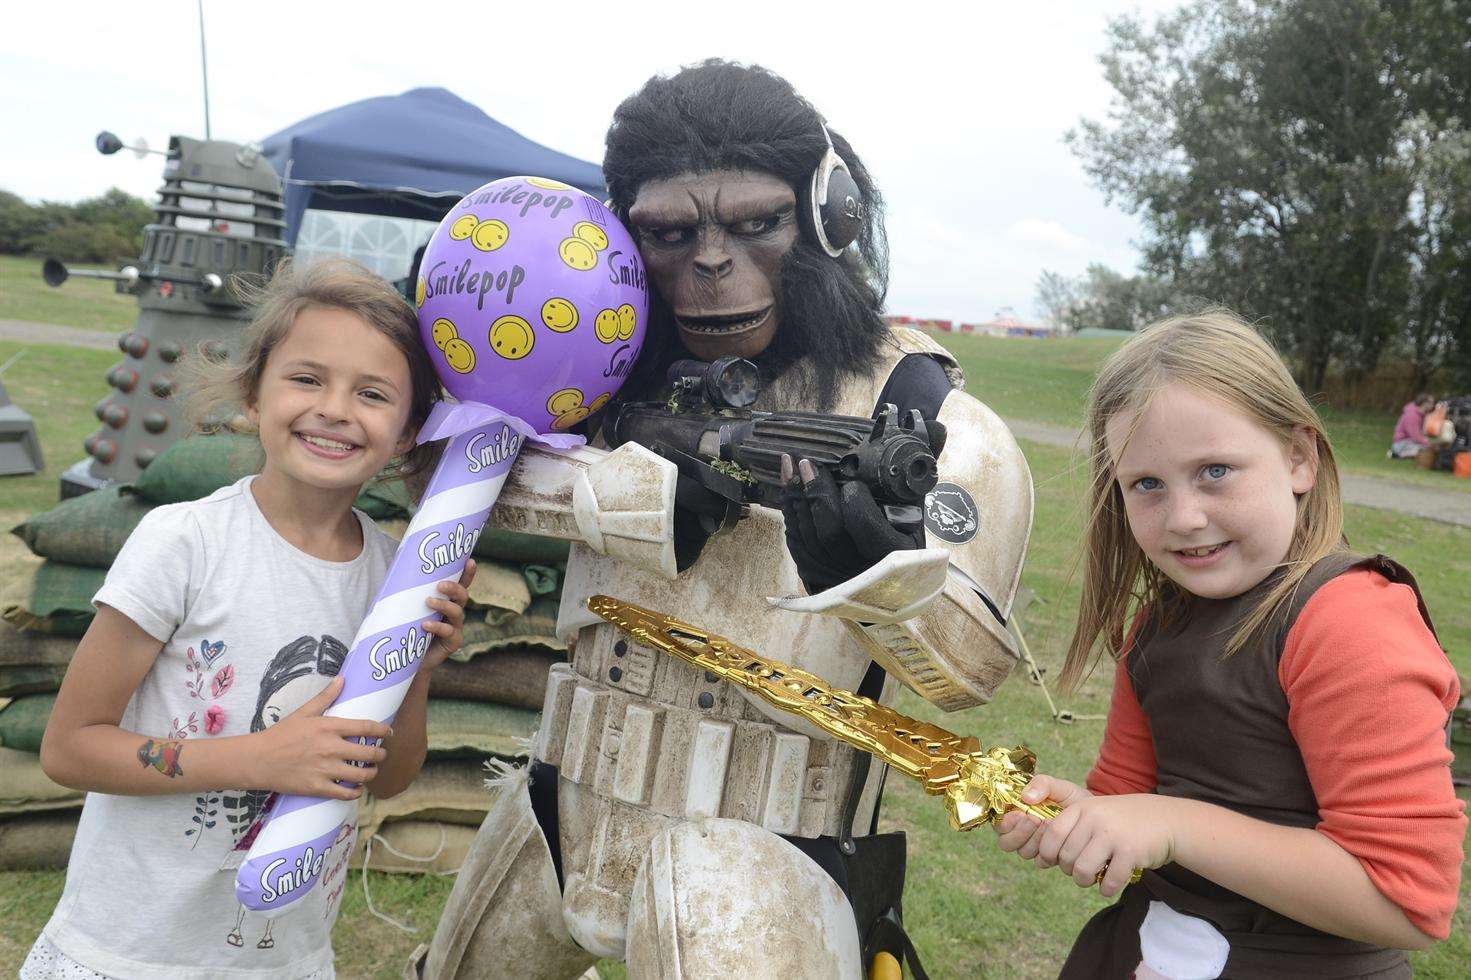 Rachel Fullbrook, eight, and Emily Walpole, seven, encounter 'Monkey Trooper' at the Sheppey Takeover sci-fi event